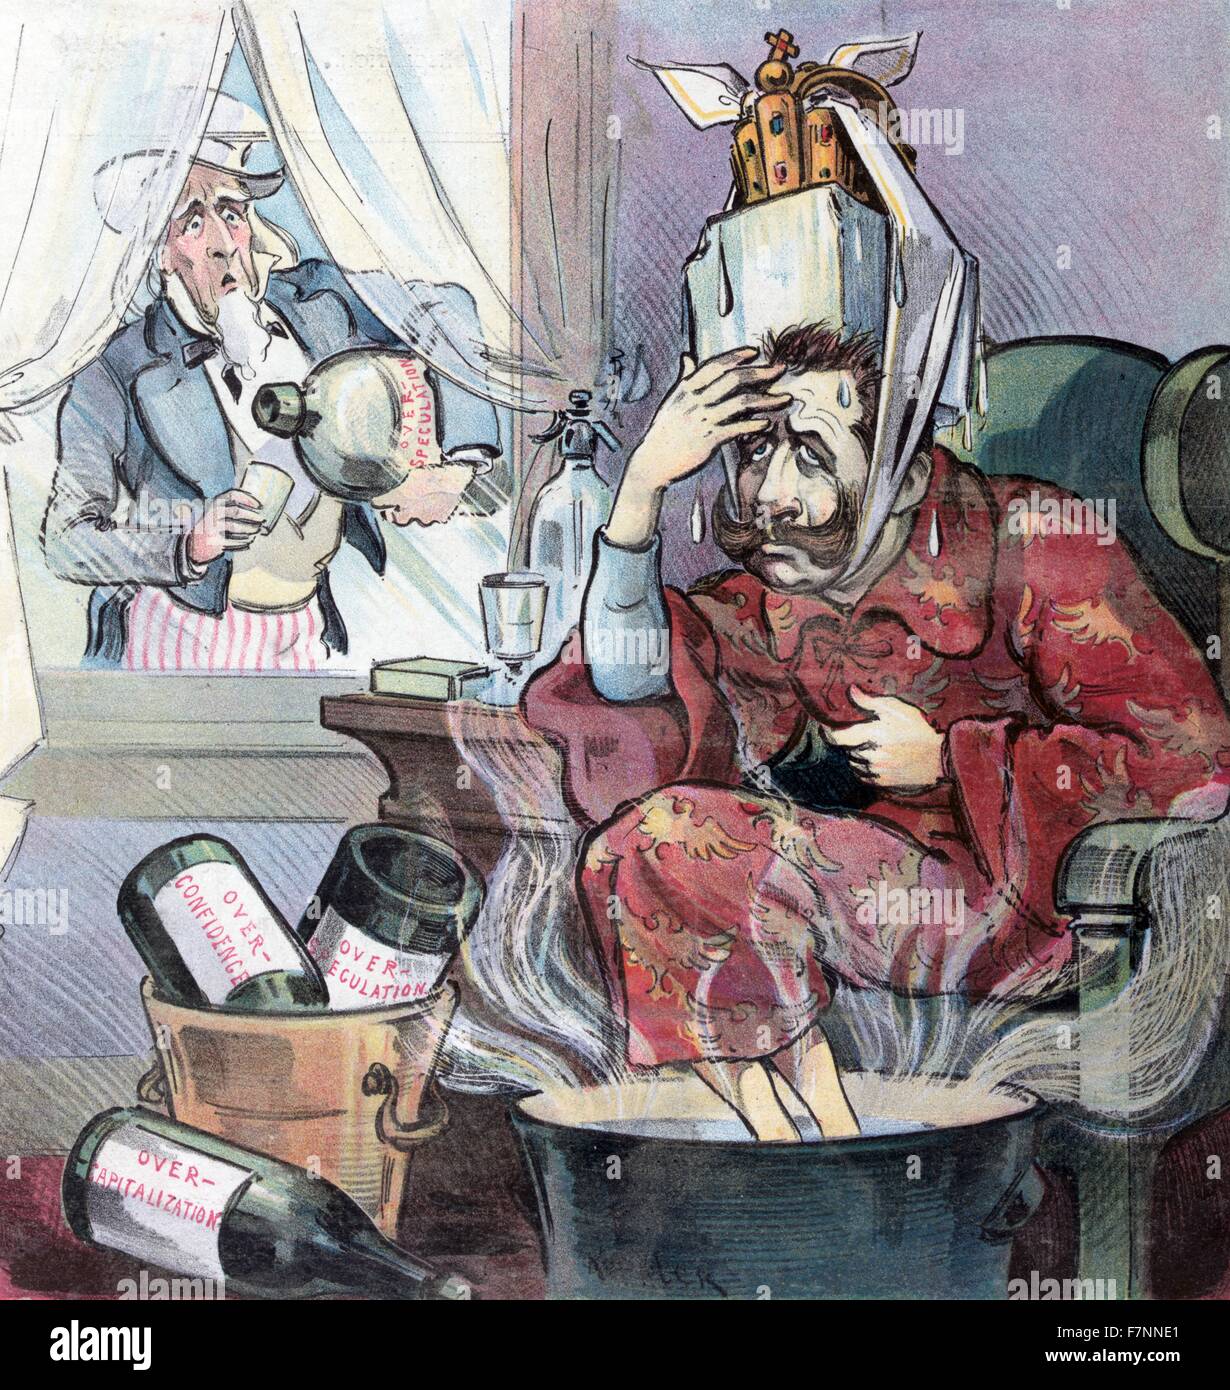 Germany's Katzenjammer. Illustration shows William II, German Emperor, suffering from over-indulgence, sitting in a chair with a block of ice on his head with his crown on top and his feet in a tub of hot water, in a bucket in the foreground are two empty bottles labeled Over-Speculation and Over-Confidence, on the floor is another empty bottle labeled Over-Capitalization. Uncle Sam is standing outside a window with a dismayed look on his face and about to fill a cup from a huge bottle labeled Over-Speculation. Stock Photo